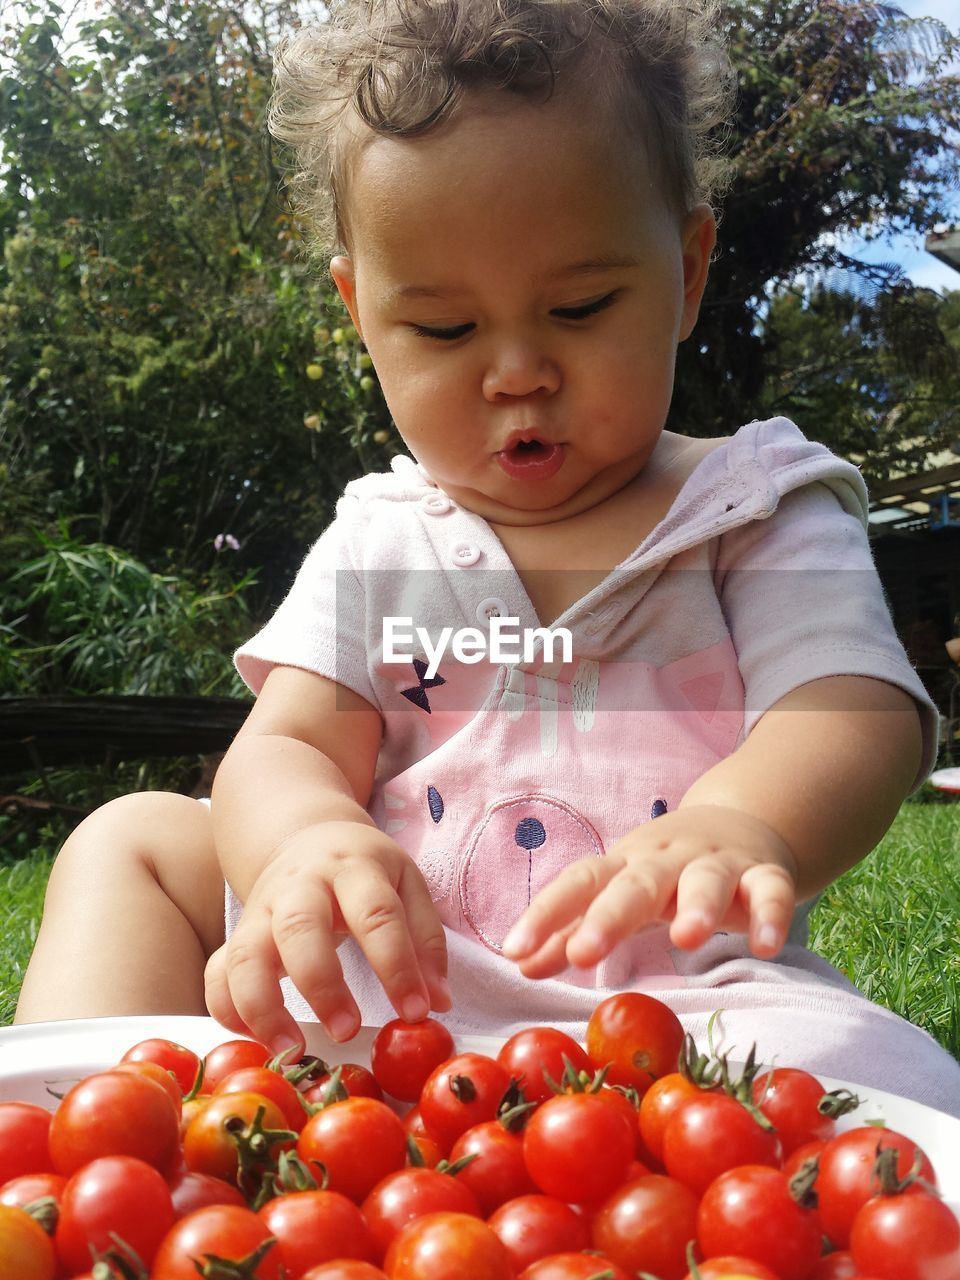 Cute baby sitting by fresh cherry tomatoes in back yard